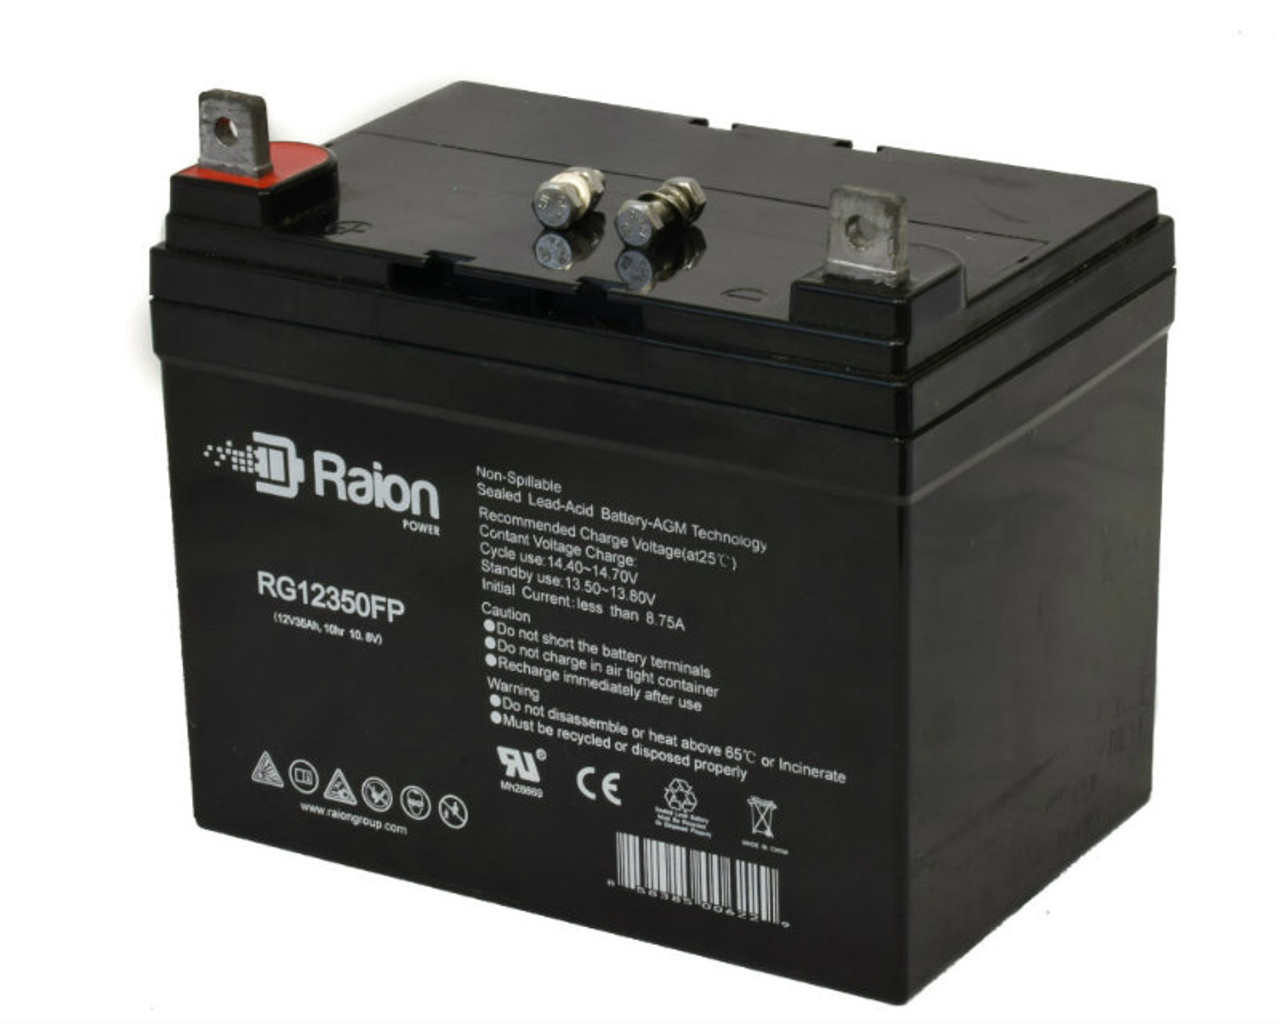 Raion Power Replacement 12V 35Ah RG12350FP Mobility Scooter Battery for Merits Health Products Travel-Ease Regal P31461